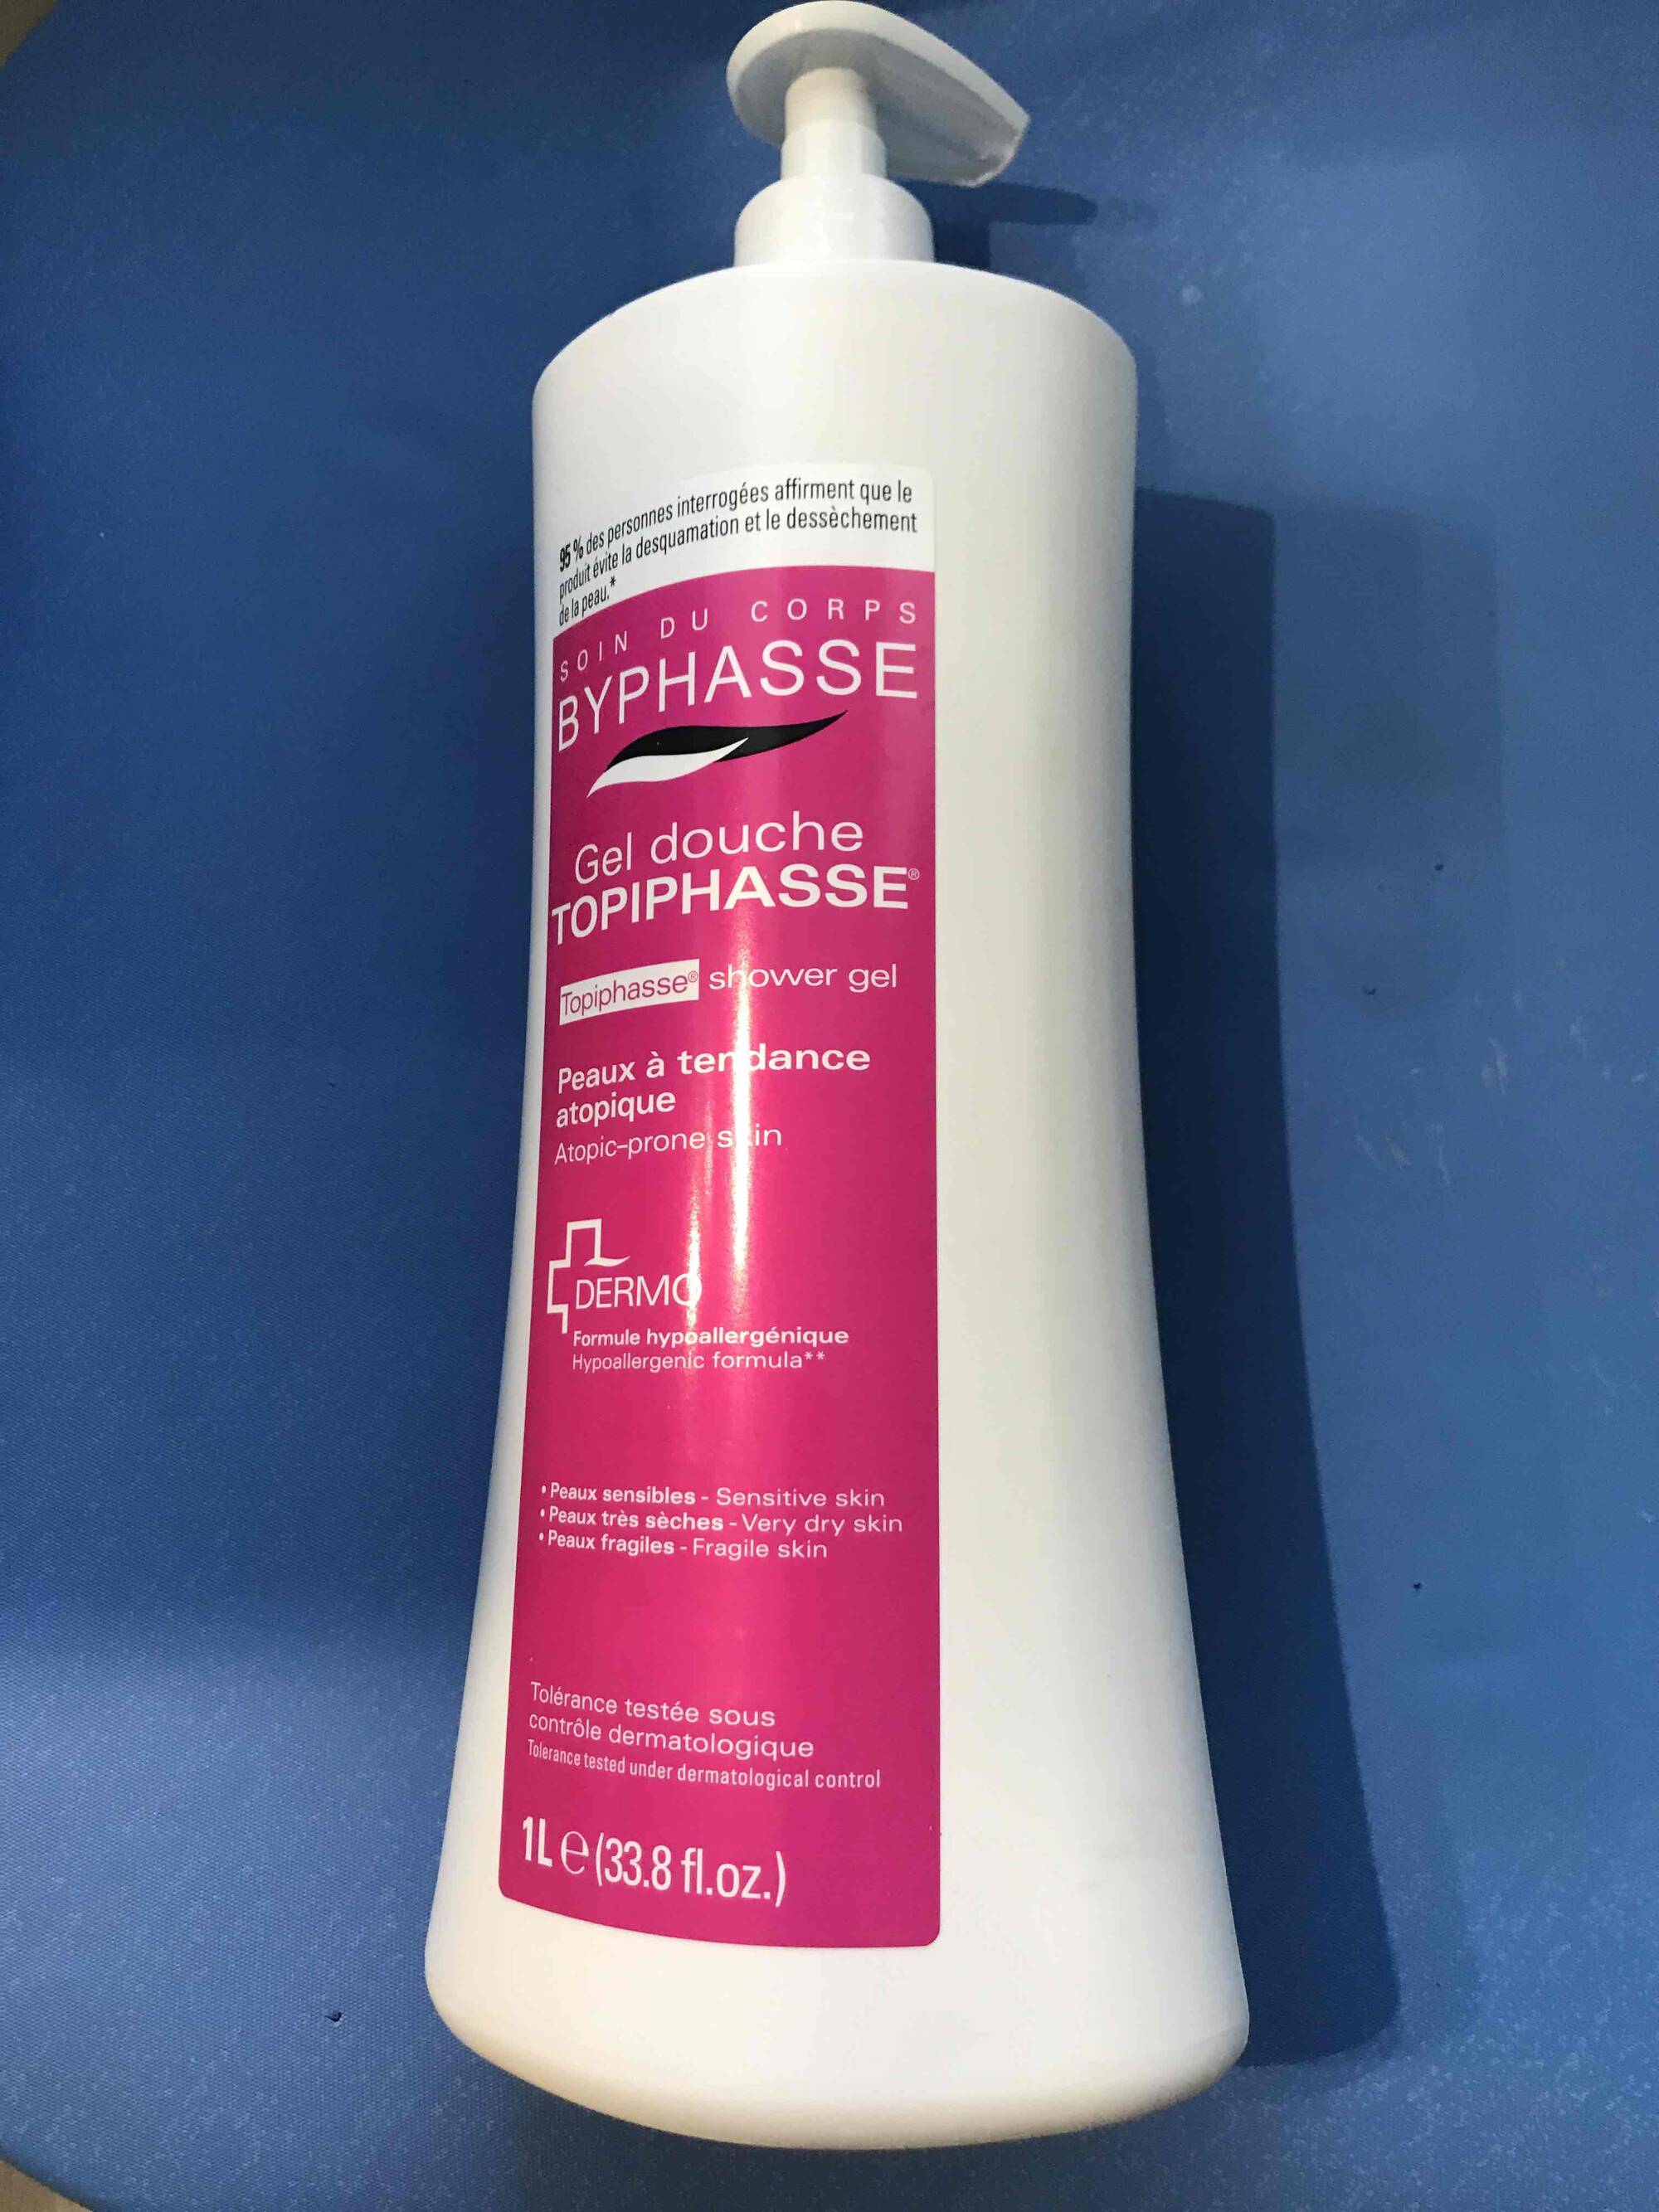 BYPHASSE - Gel douche topiphasse